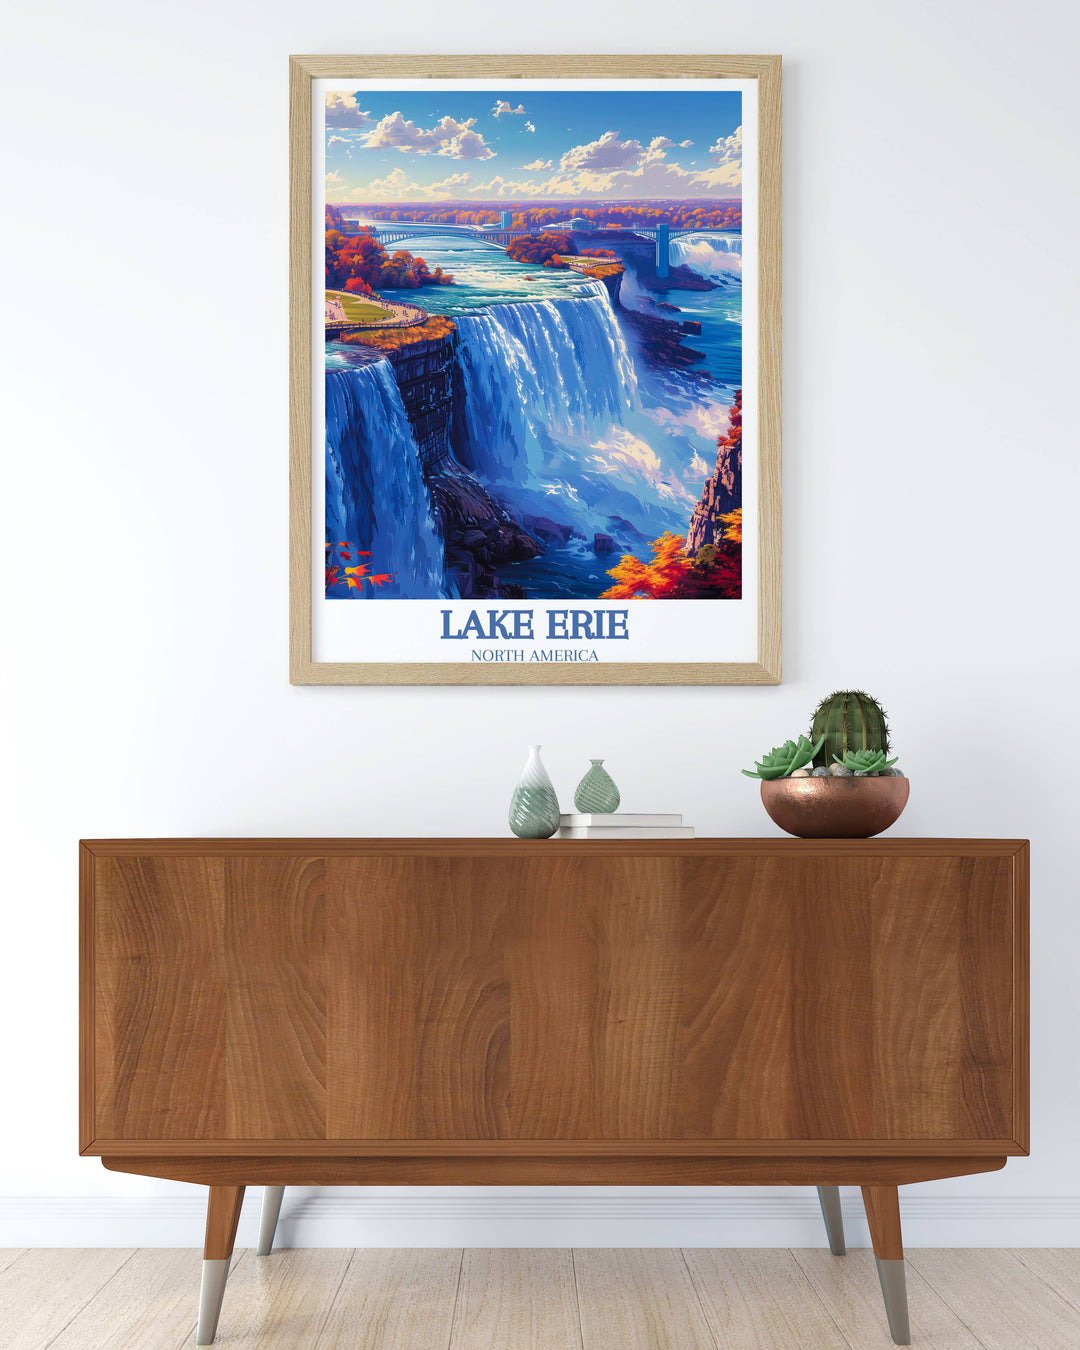 Lake Erie painting depicting a vibrant sunset, adds a touch of warmth and color to any interior decor scheme.